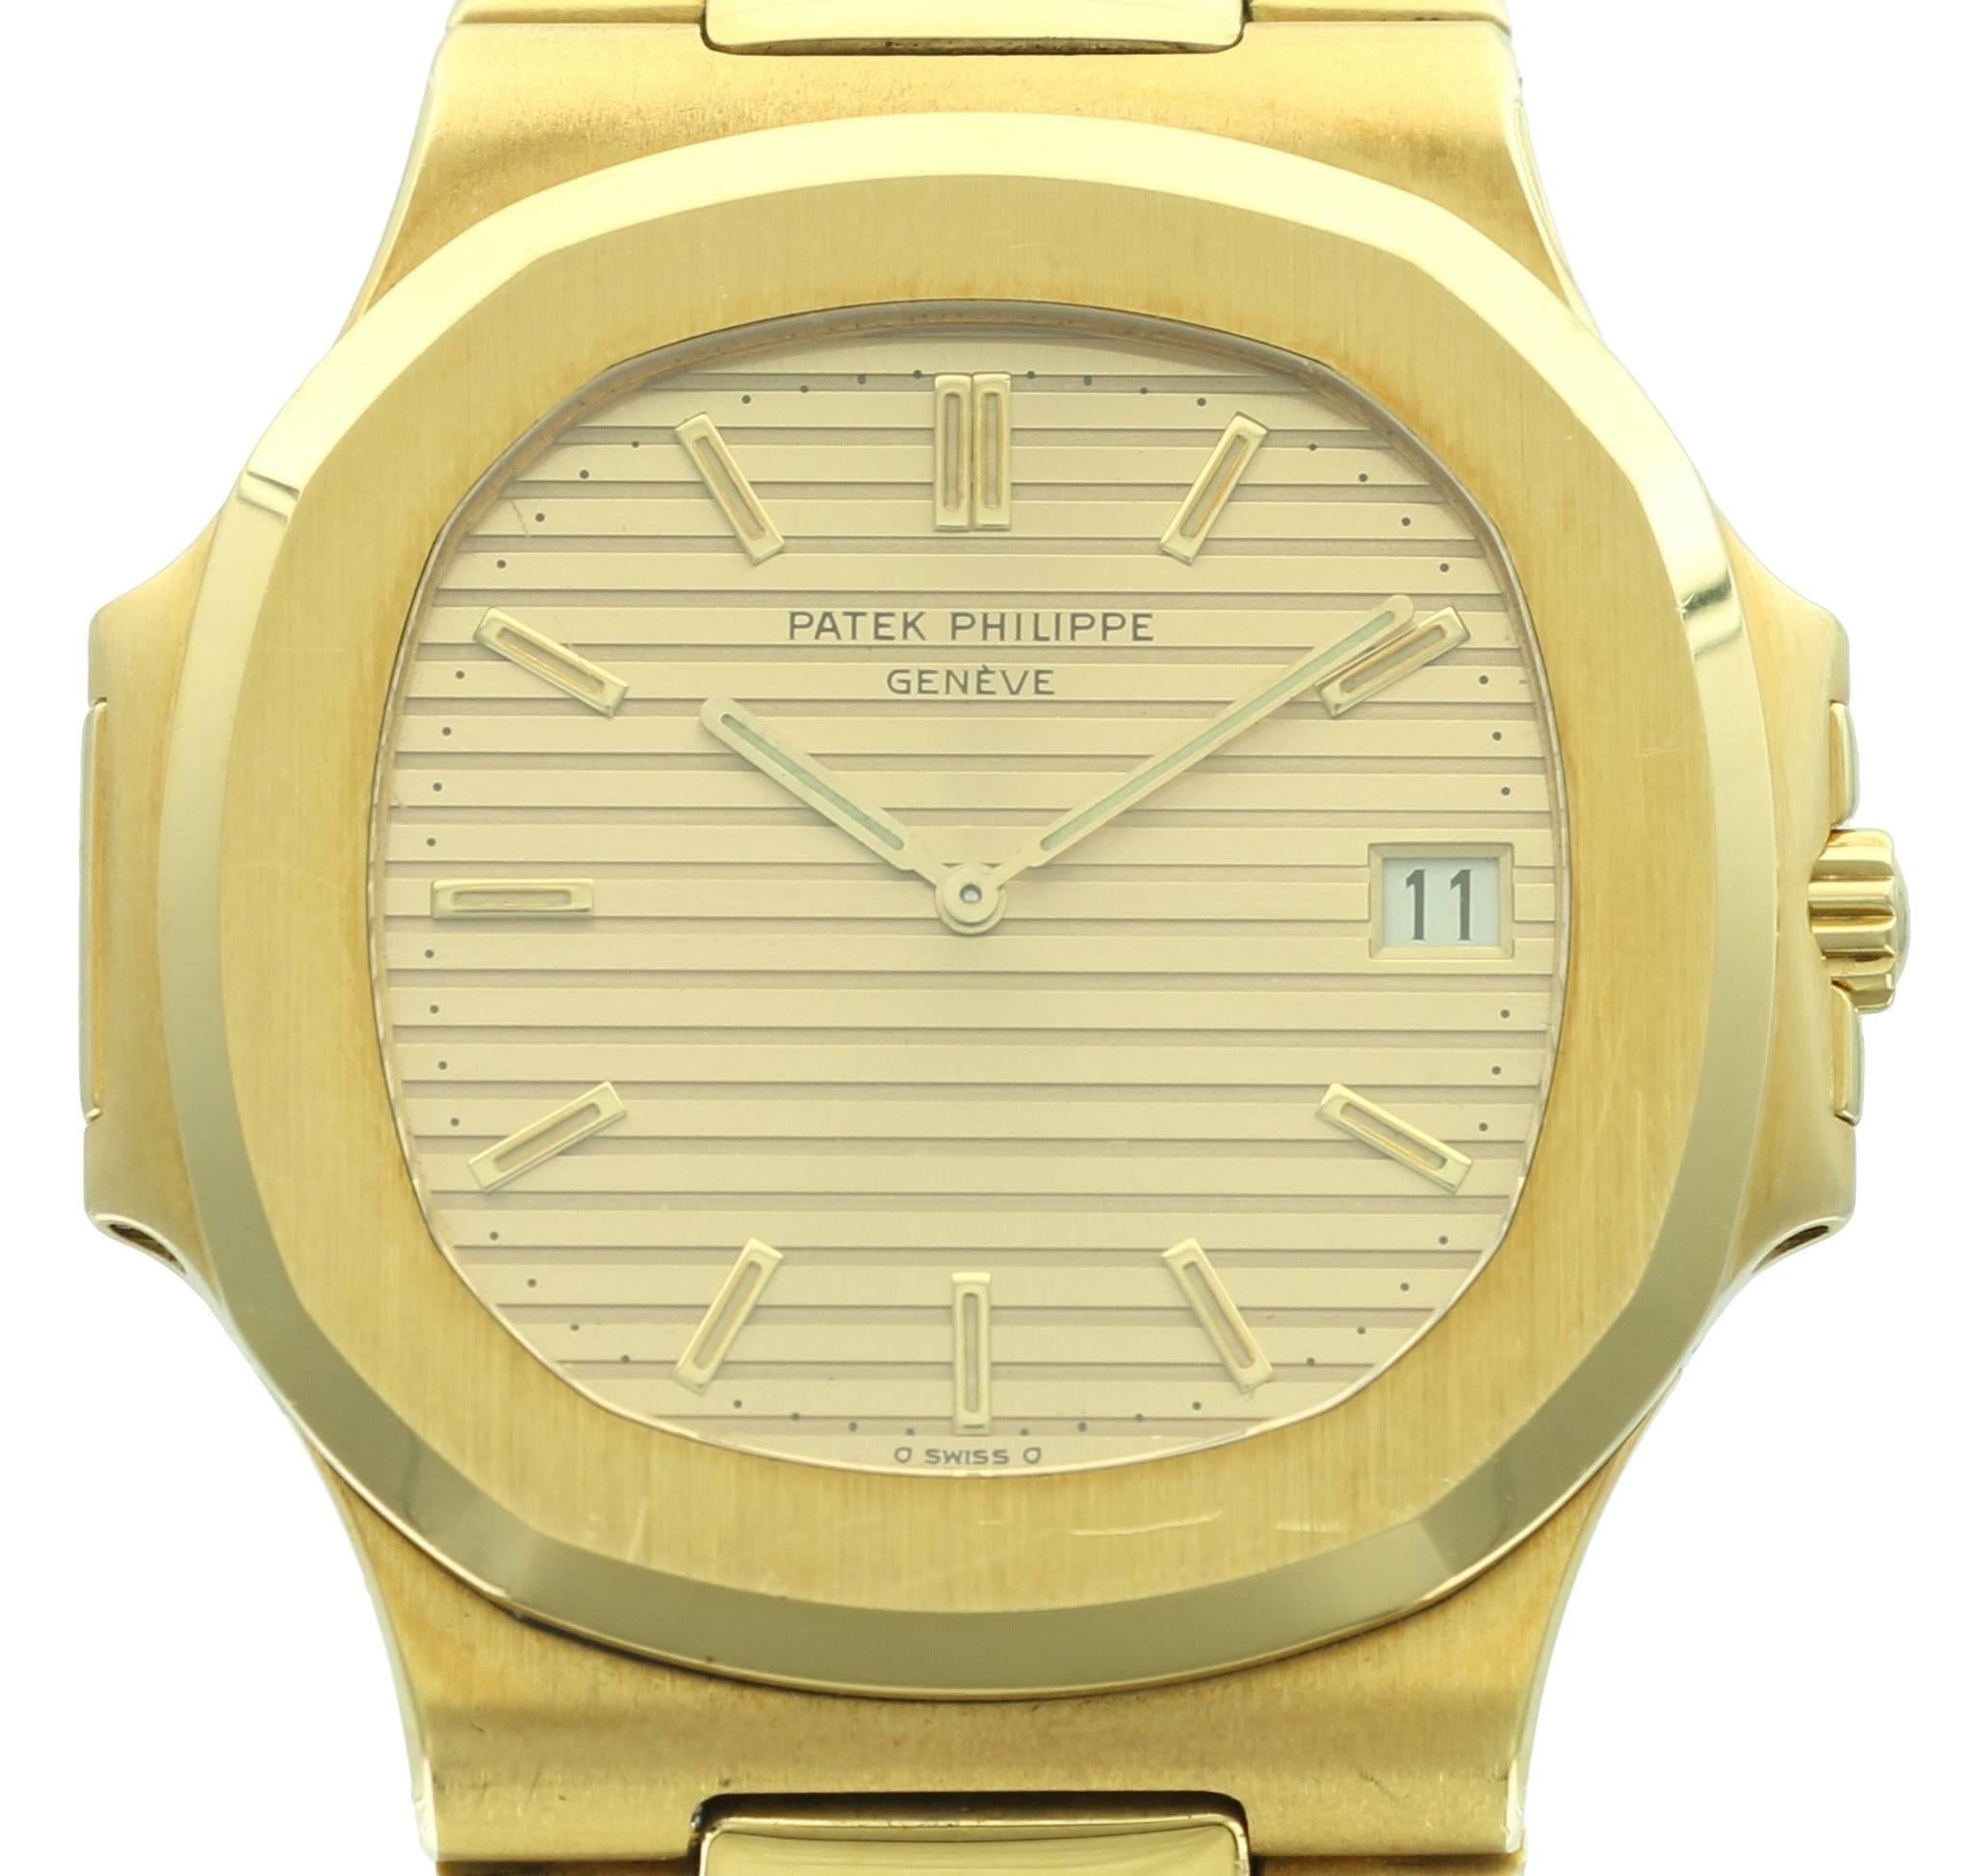 This beautiful yellow gold Patek Philippe Nautilus, ref. 3700 is in excellent, never polished condition. You can see the original brushed finish around the bezel as an example of the original state of the watch. The 3700 was the first reference of